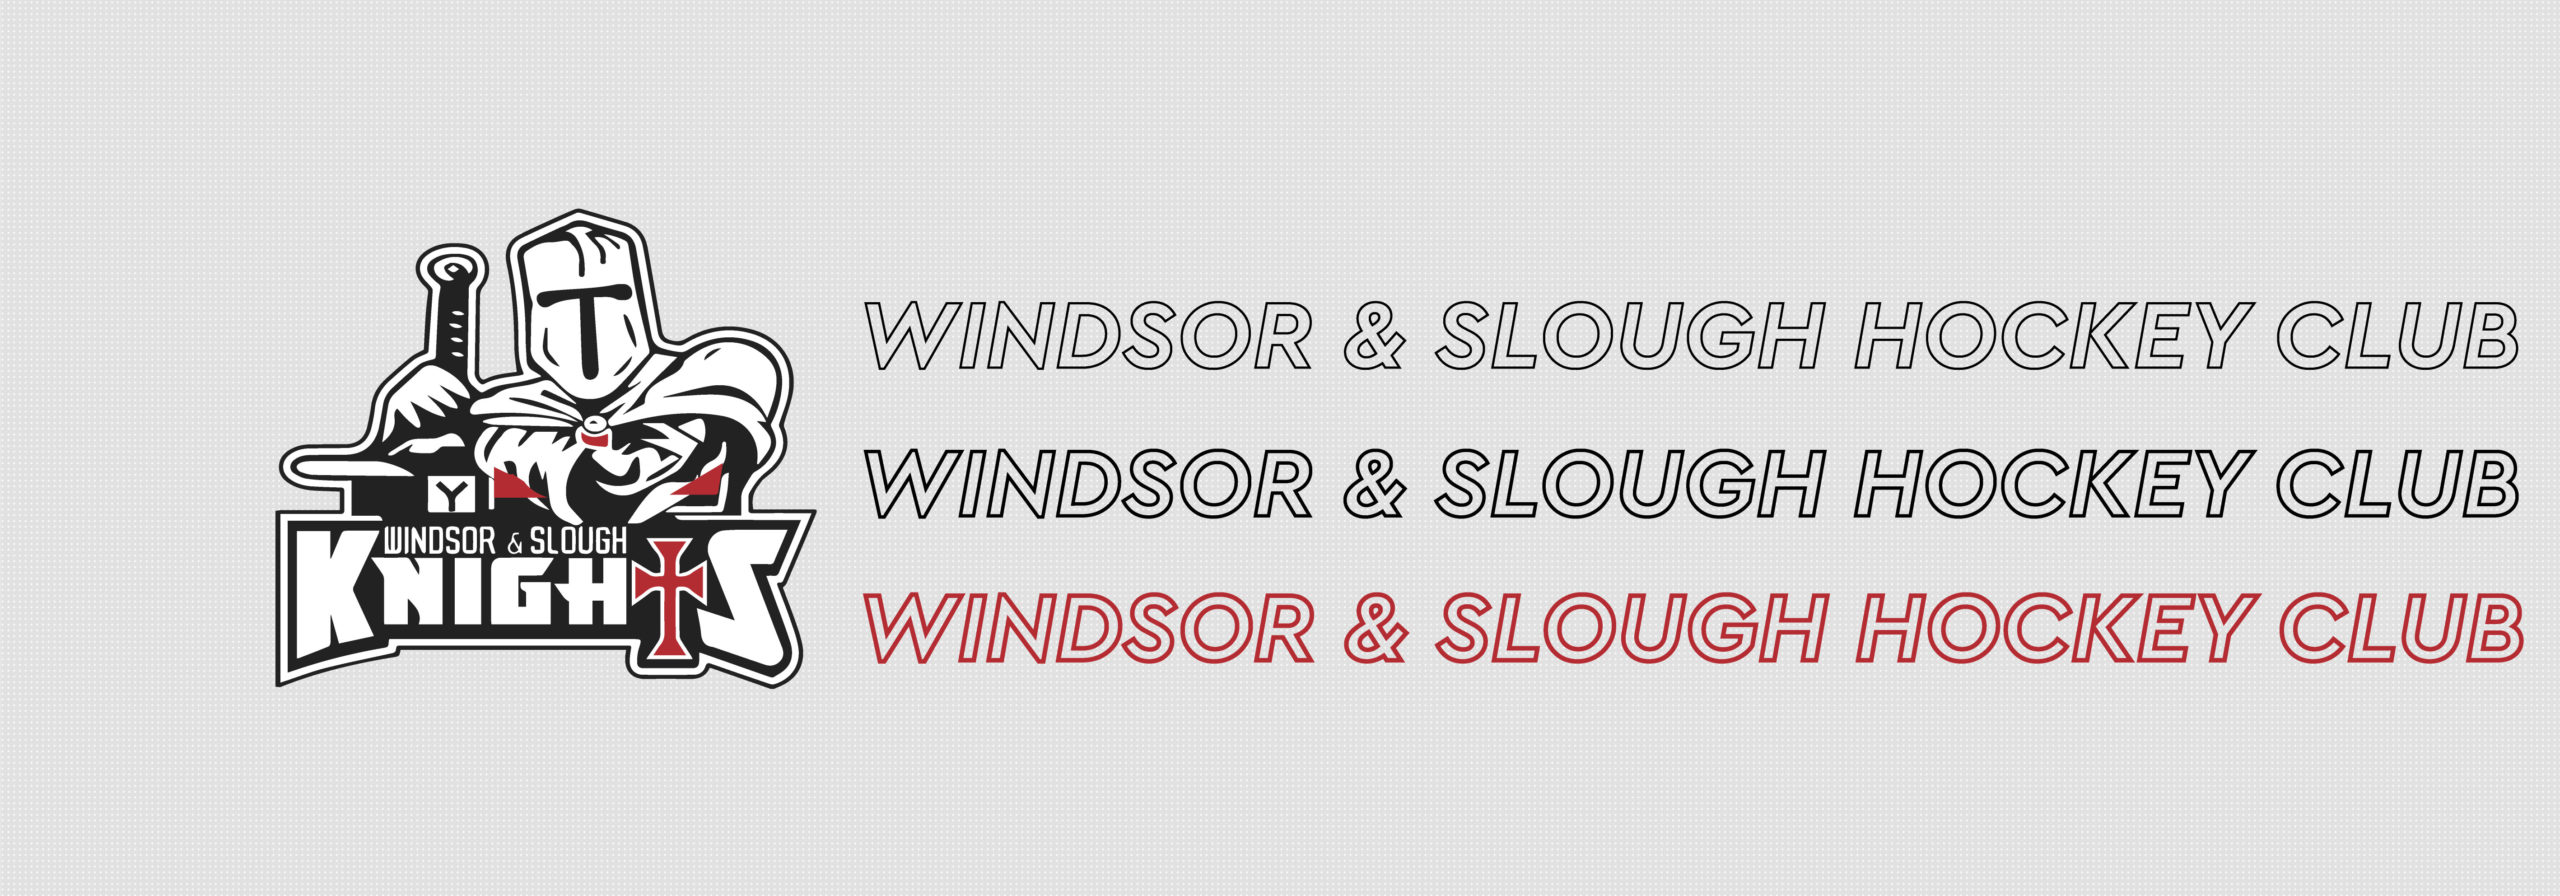 Windsor and Slough Knights Hockey Club